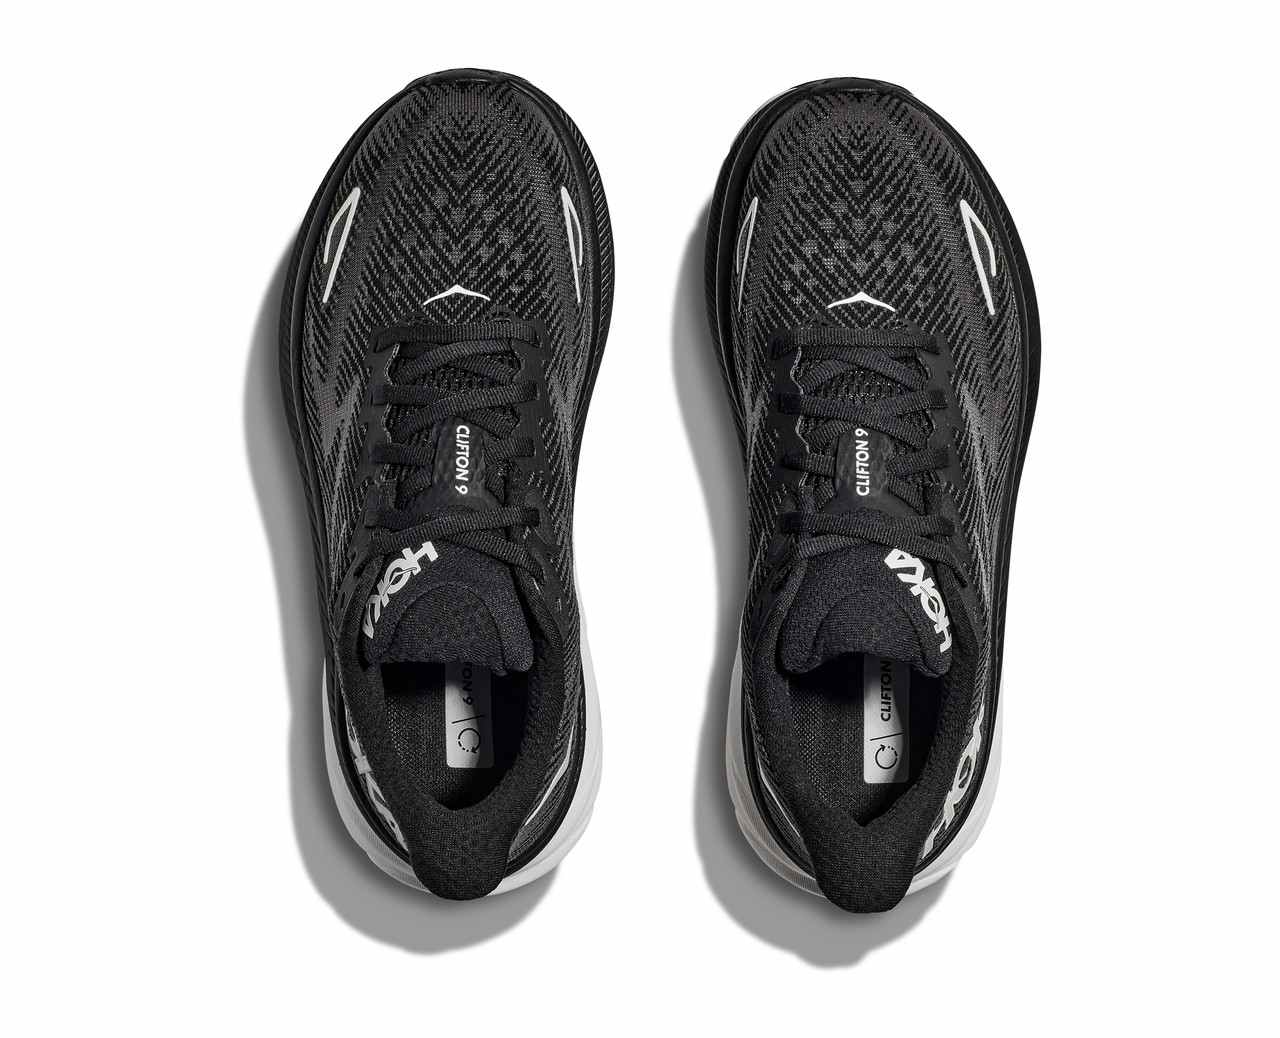 Clifton 9 Road Running Shoes Black/White